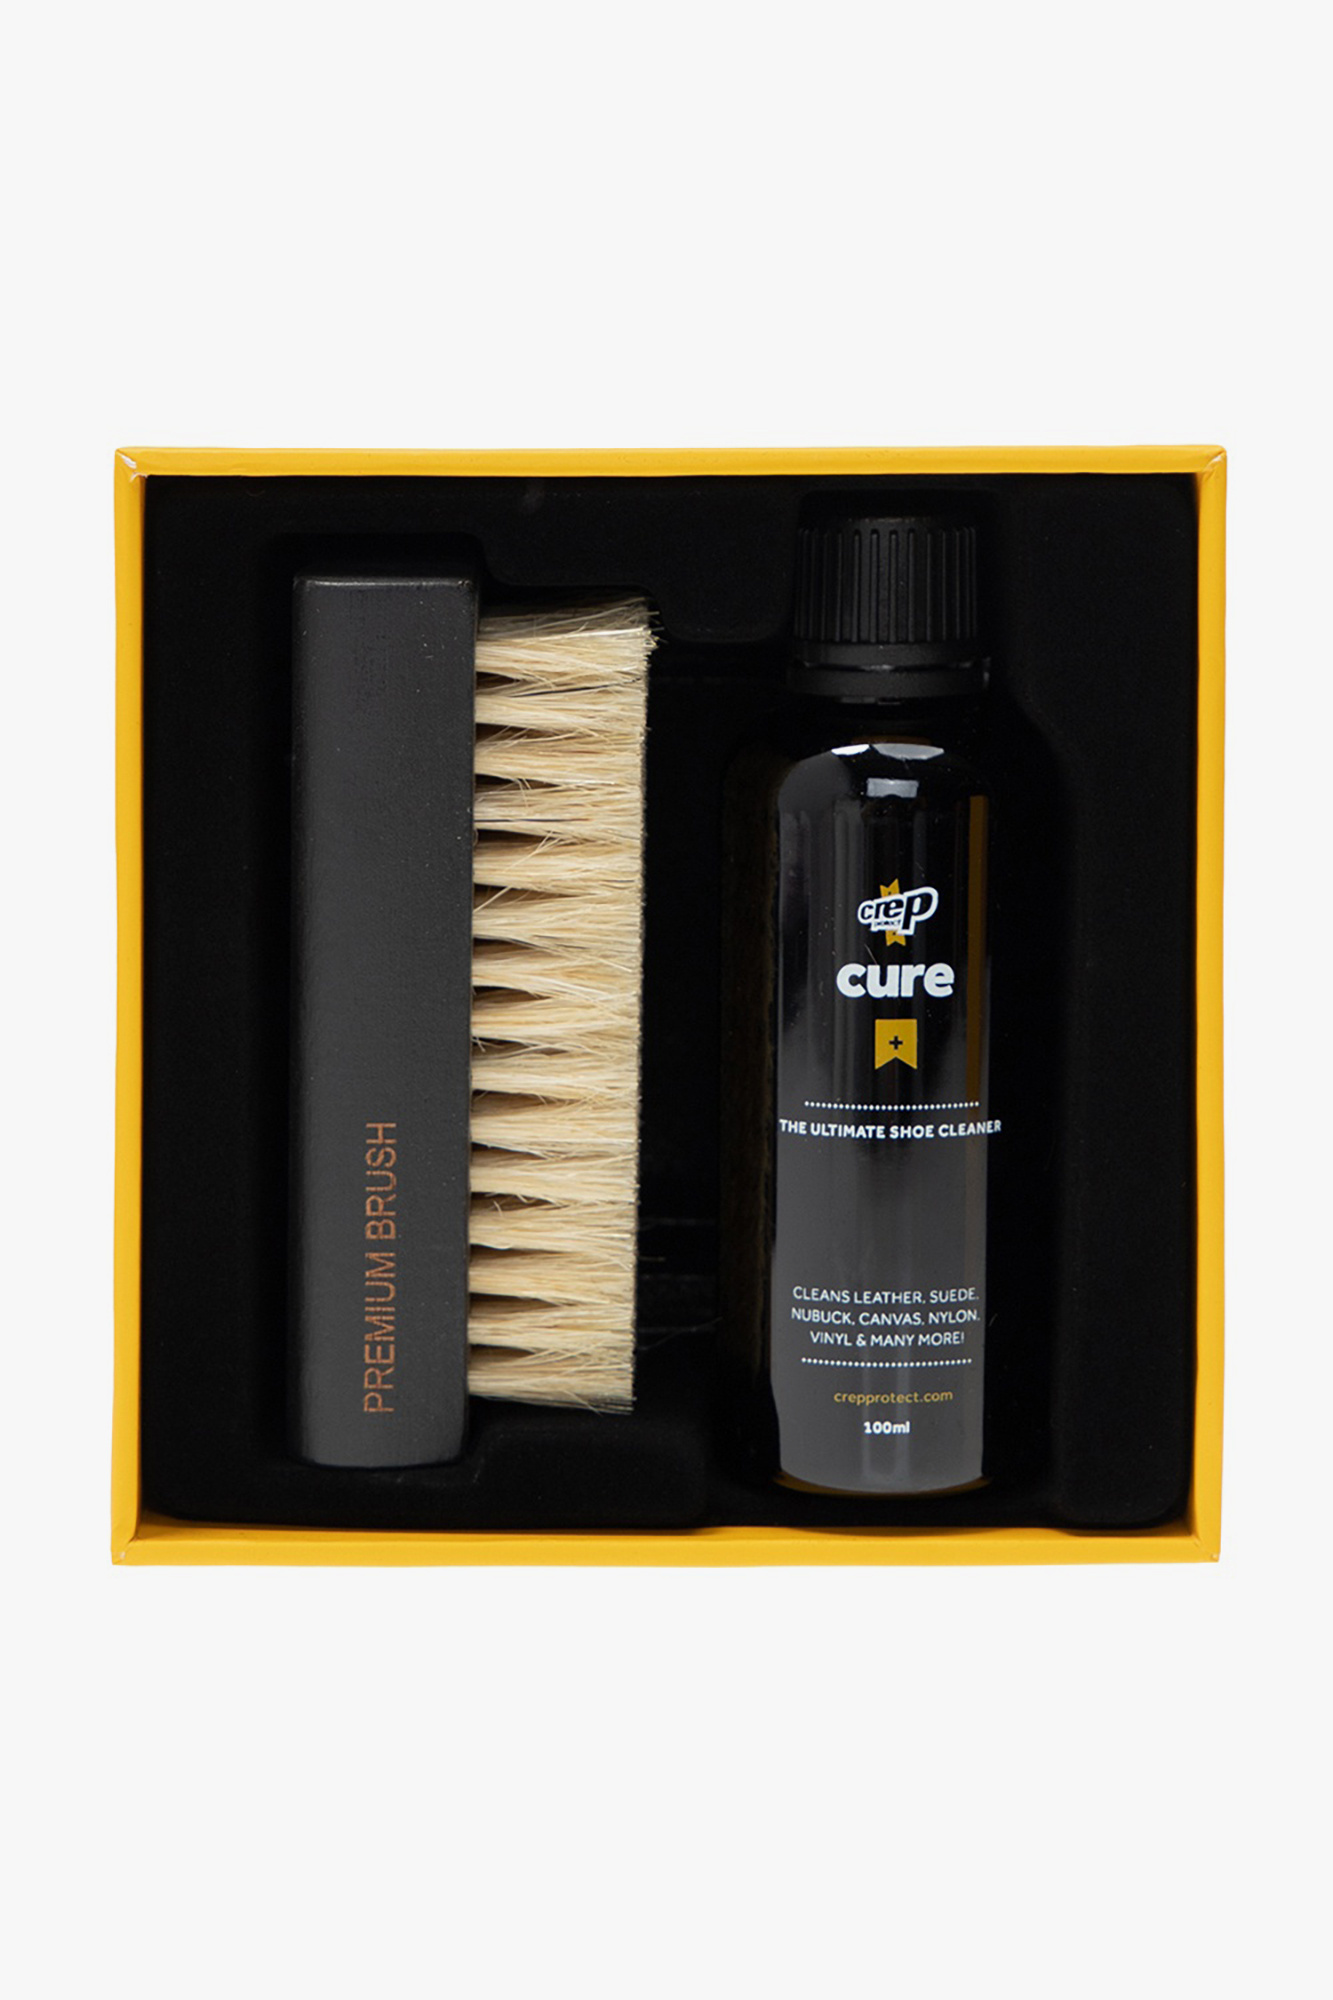 Crep Protect ‘Ultimate Box’ CHINESE shoe cleaning kit